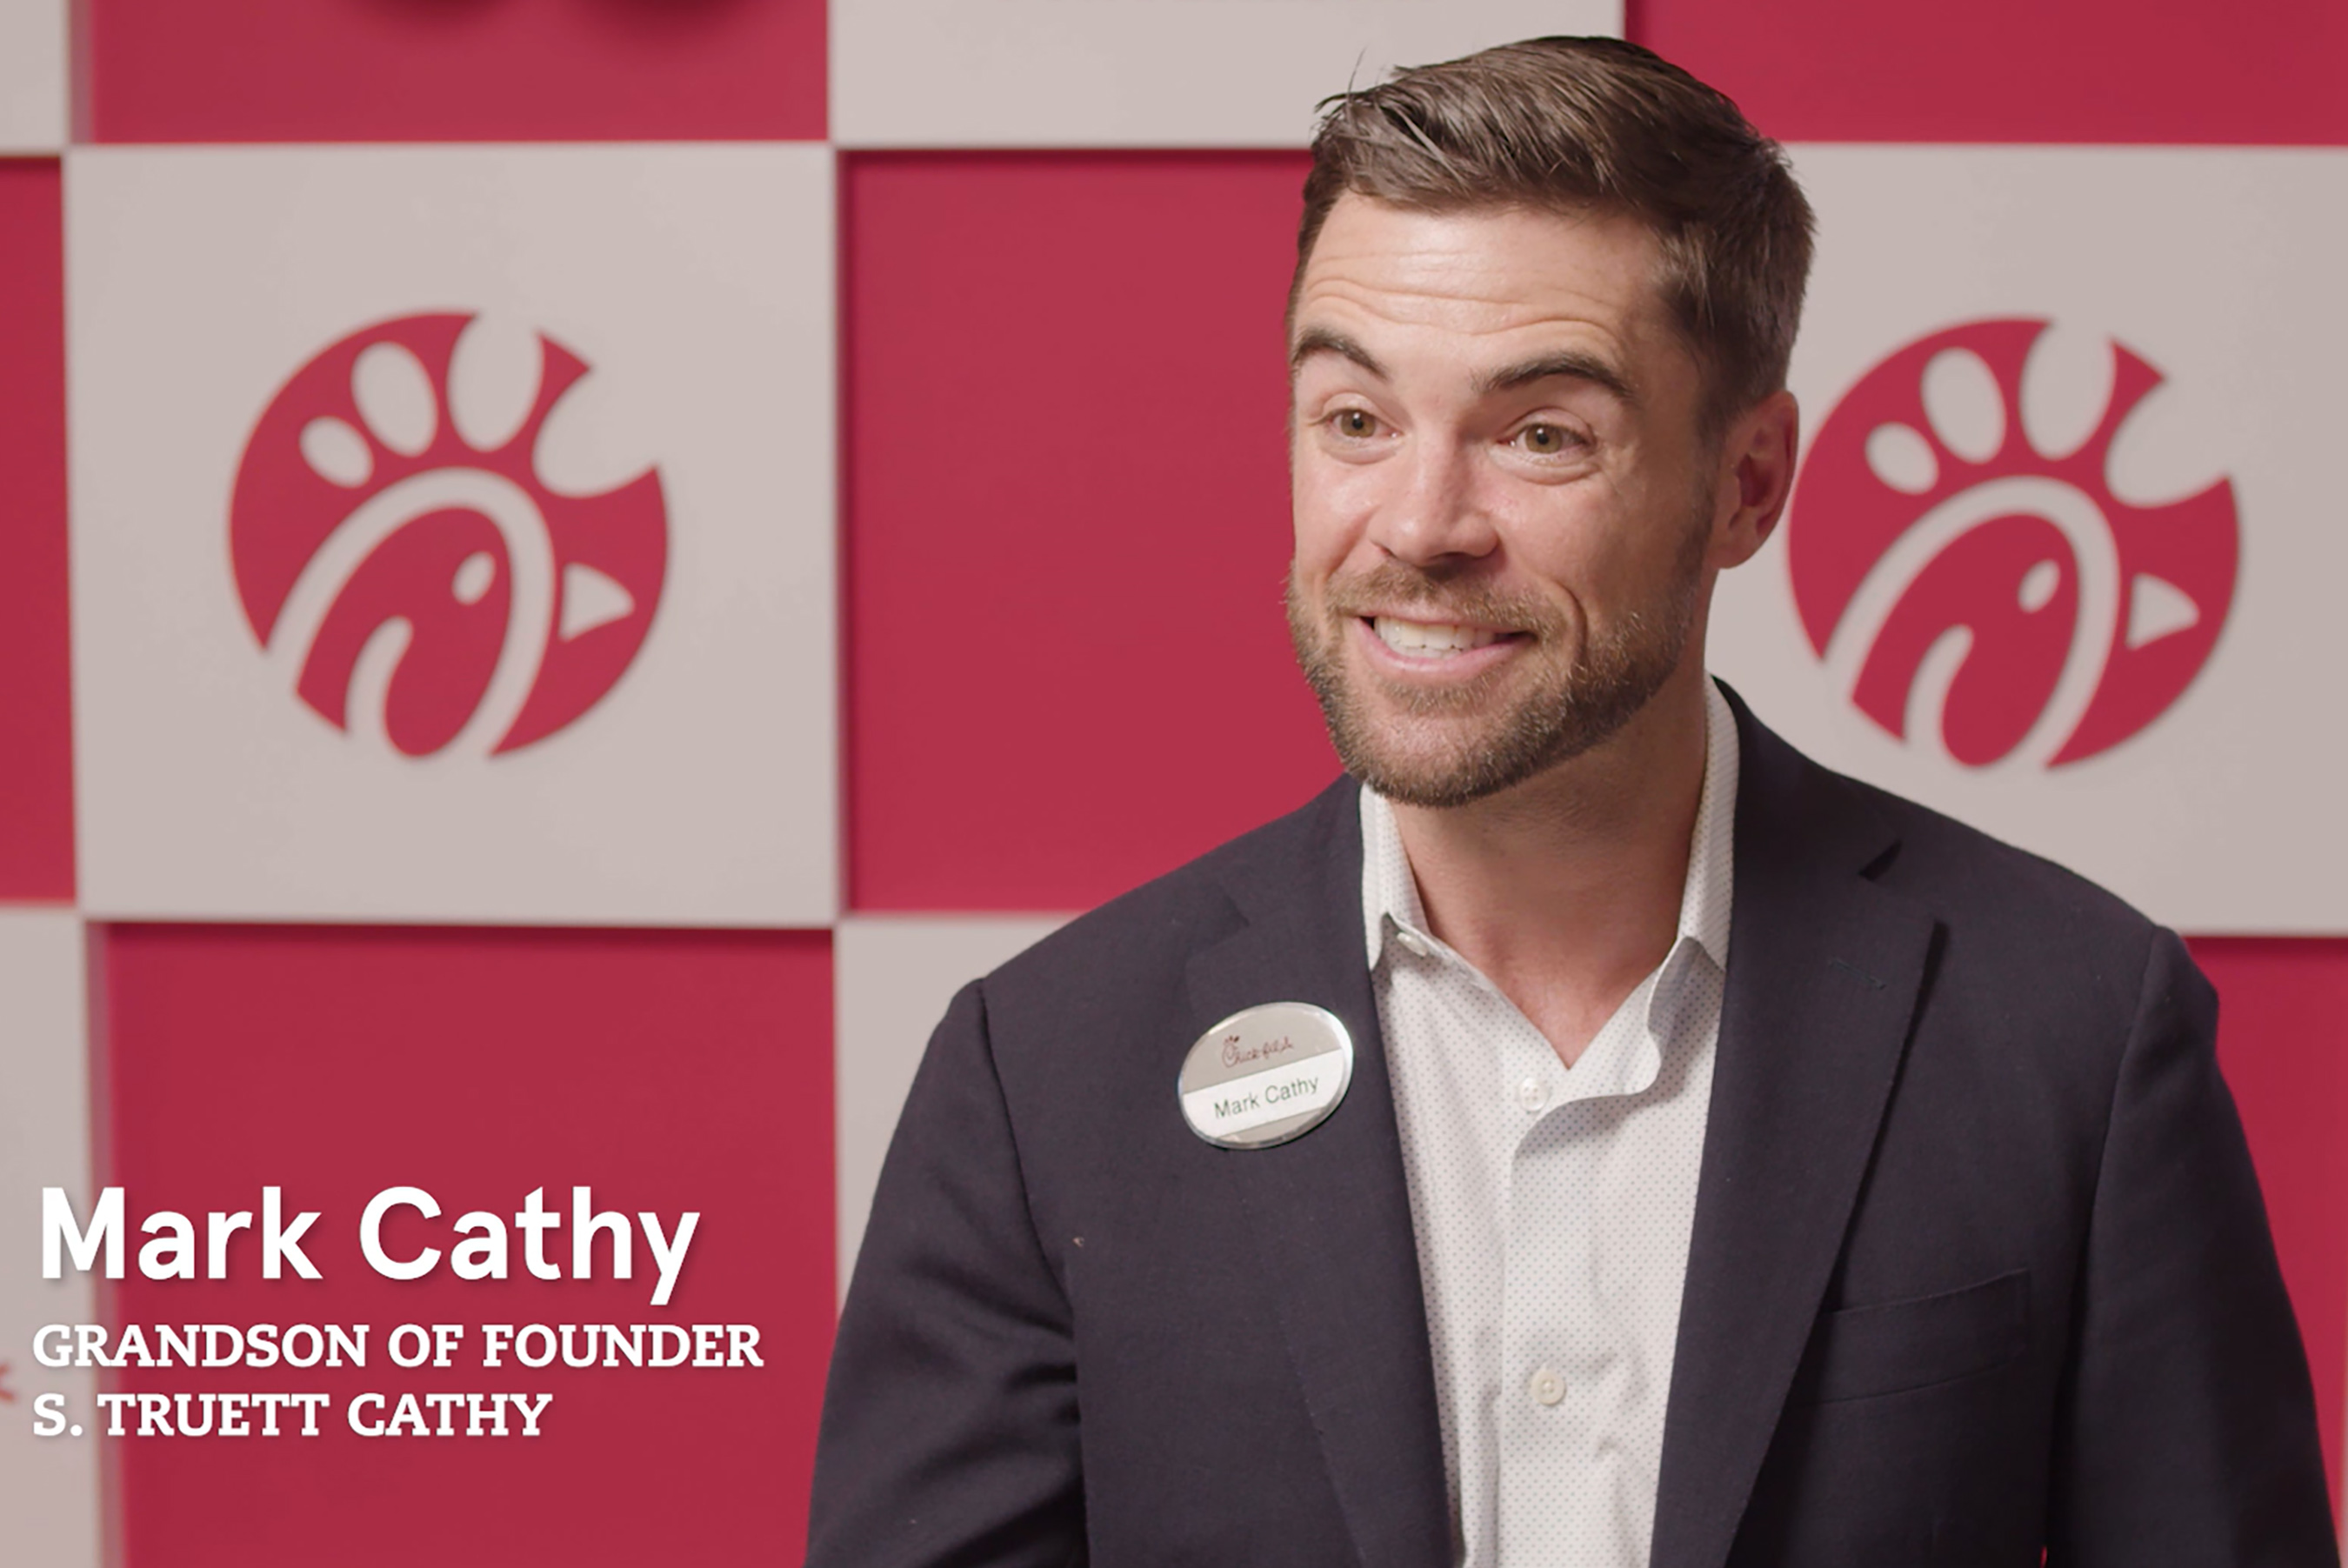 Chick-fil-A awards $24 million in scholarships to 12,699 restaurant Team Members across the U.S. and Canada to help further their education.